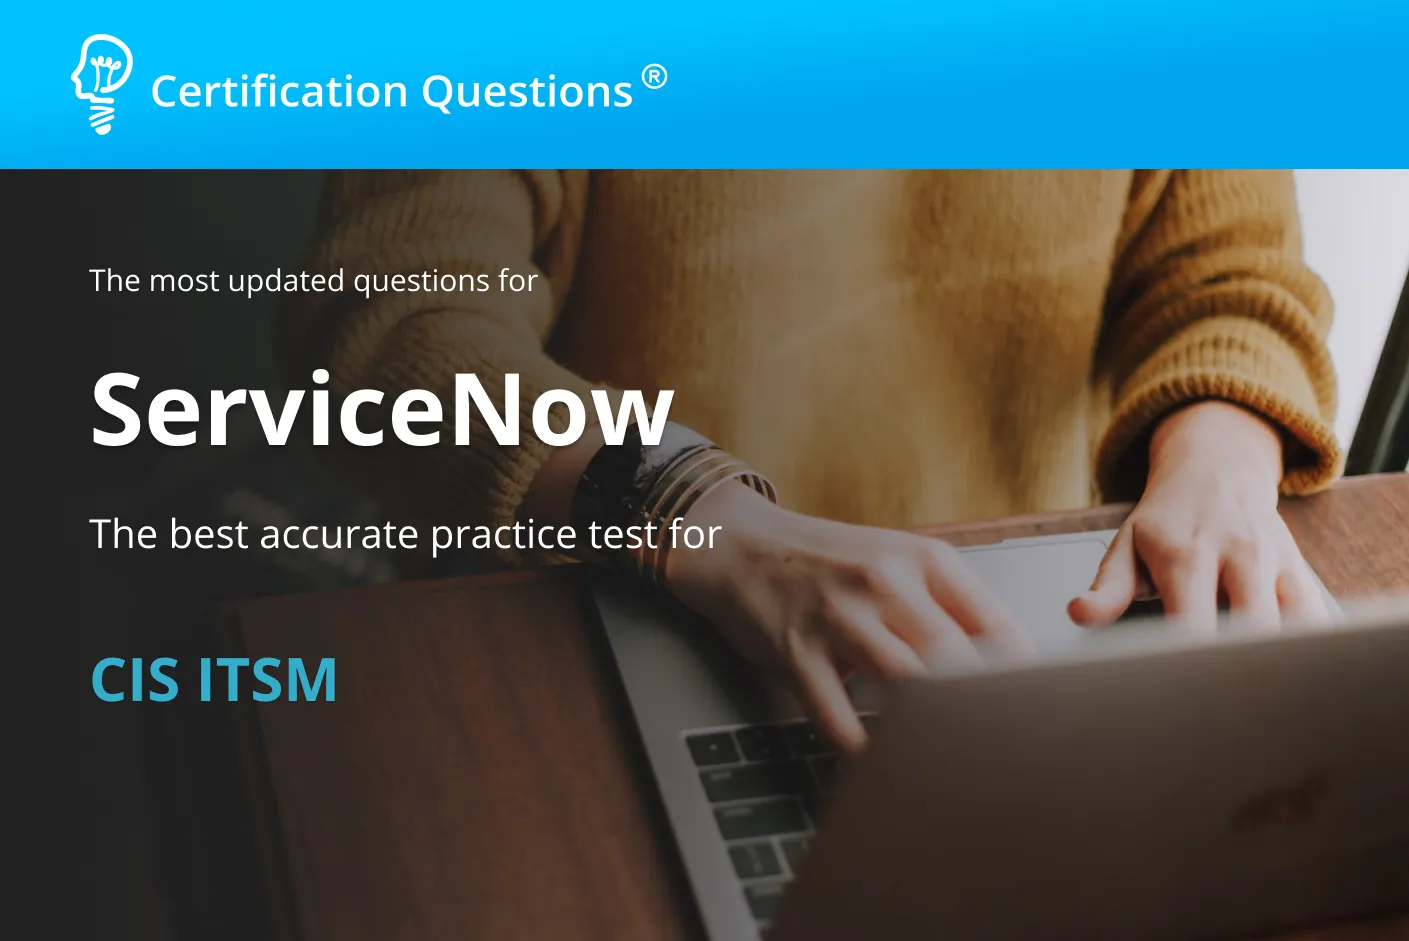 This image represents the ServiceNow CIS ITSM exam questions